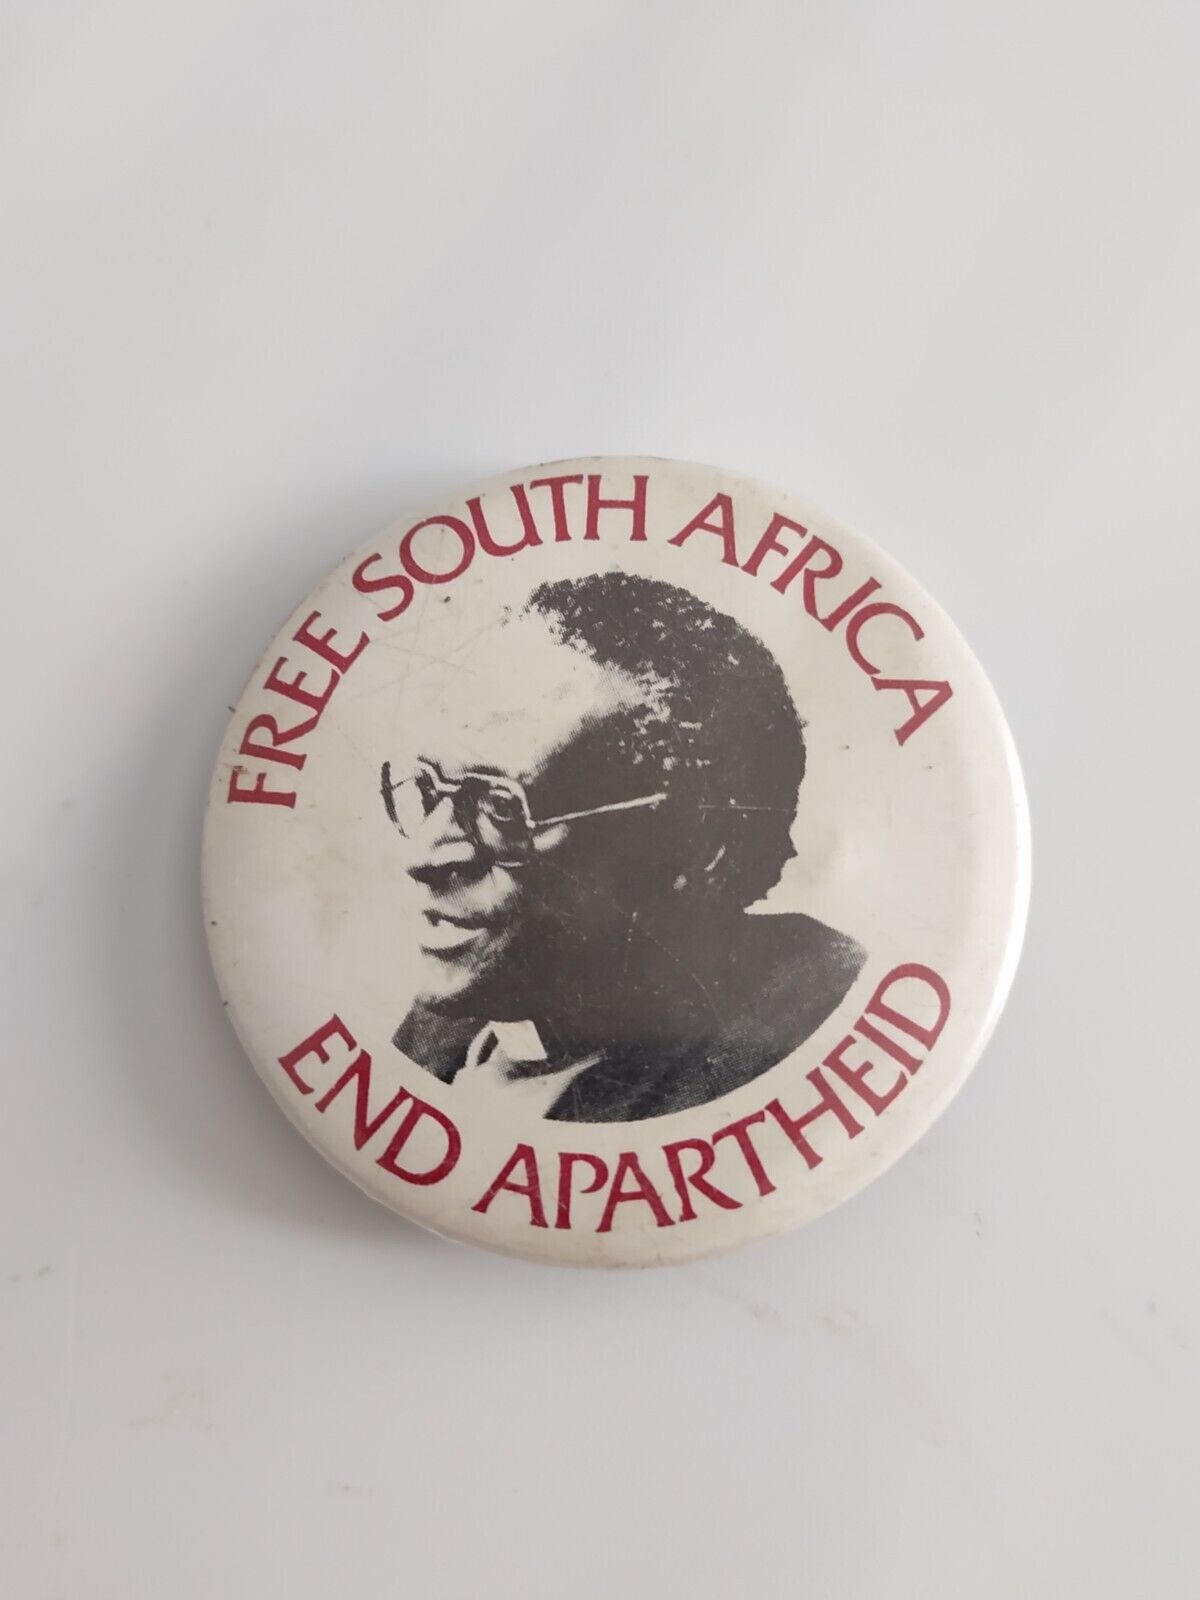 Vtg Free South Africa Civil Rights End Apartheid Justice Protest Button Pin RARE